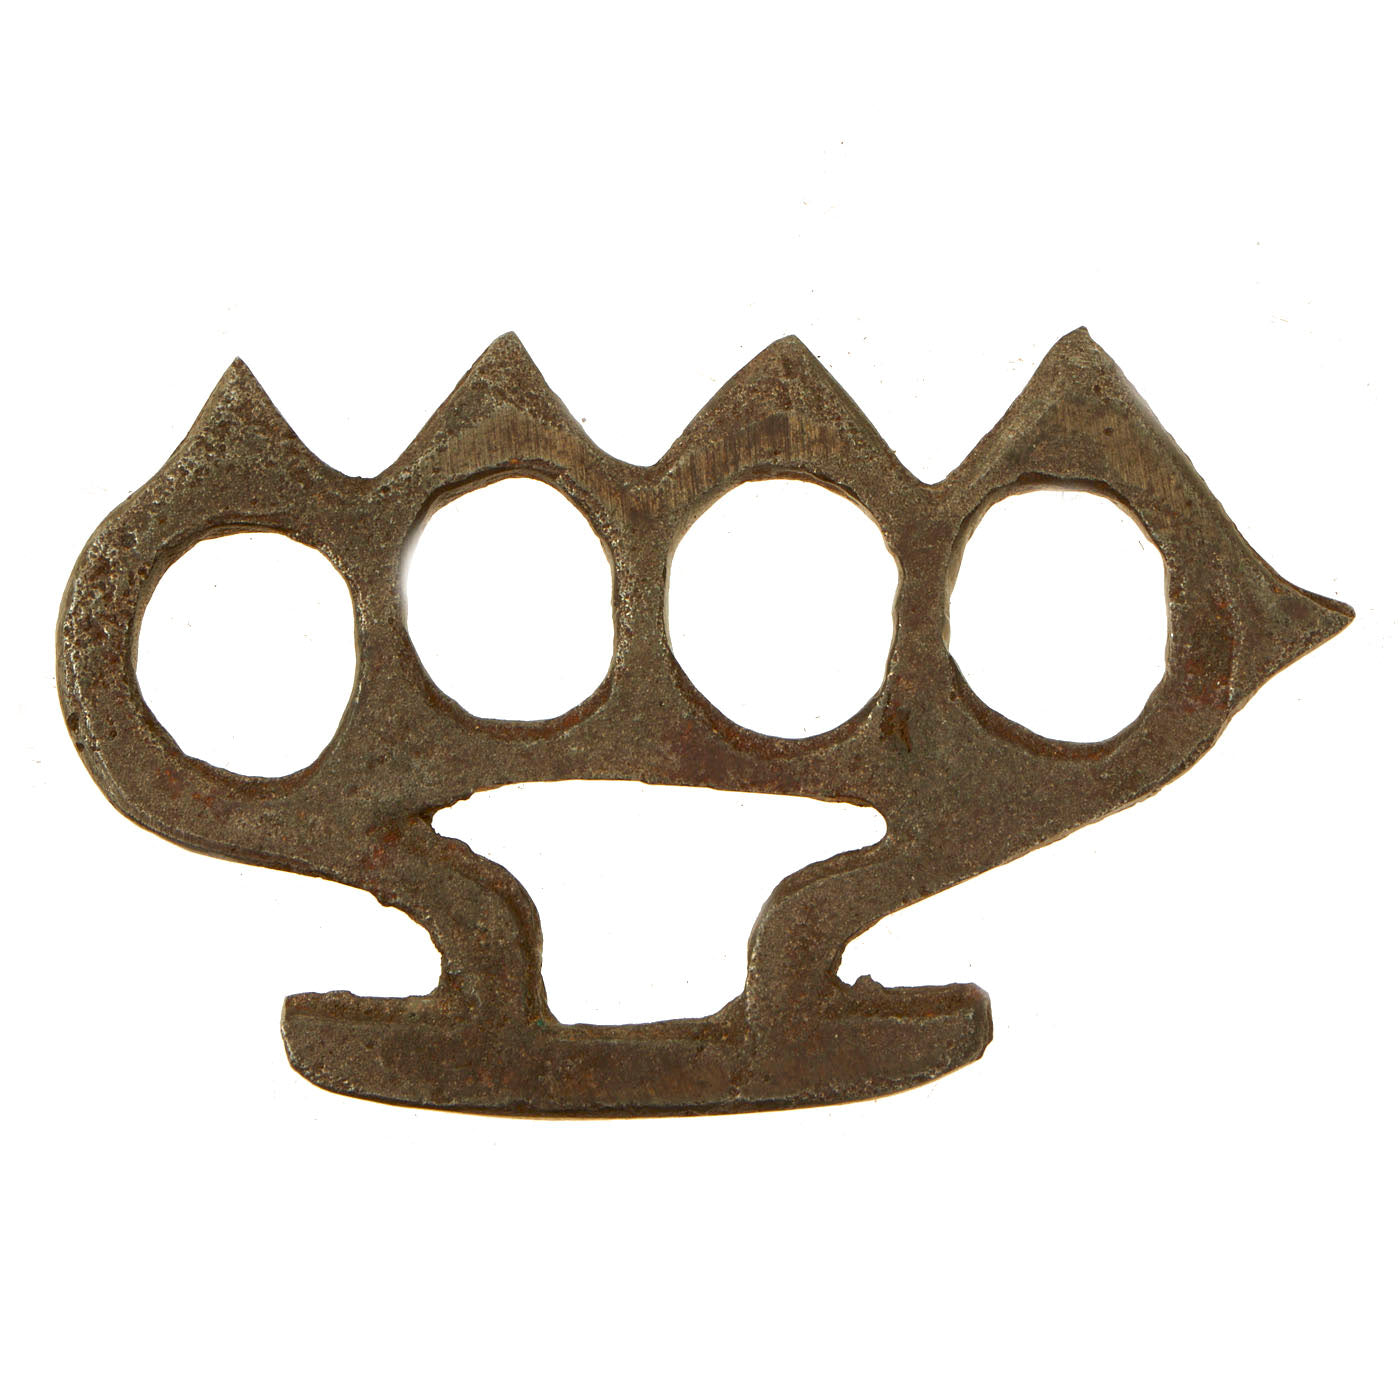 Vintage Spiked Brass Knuckle Dusters